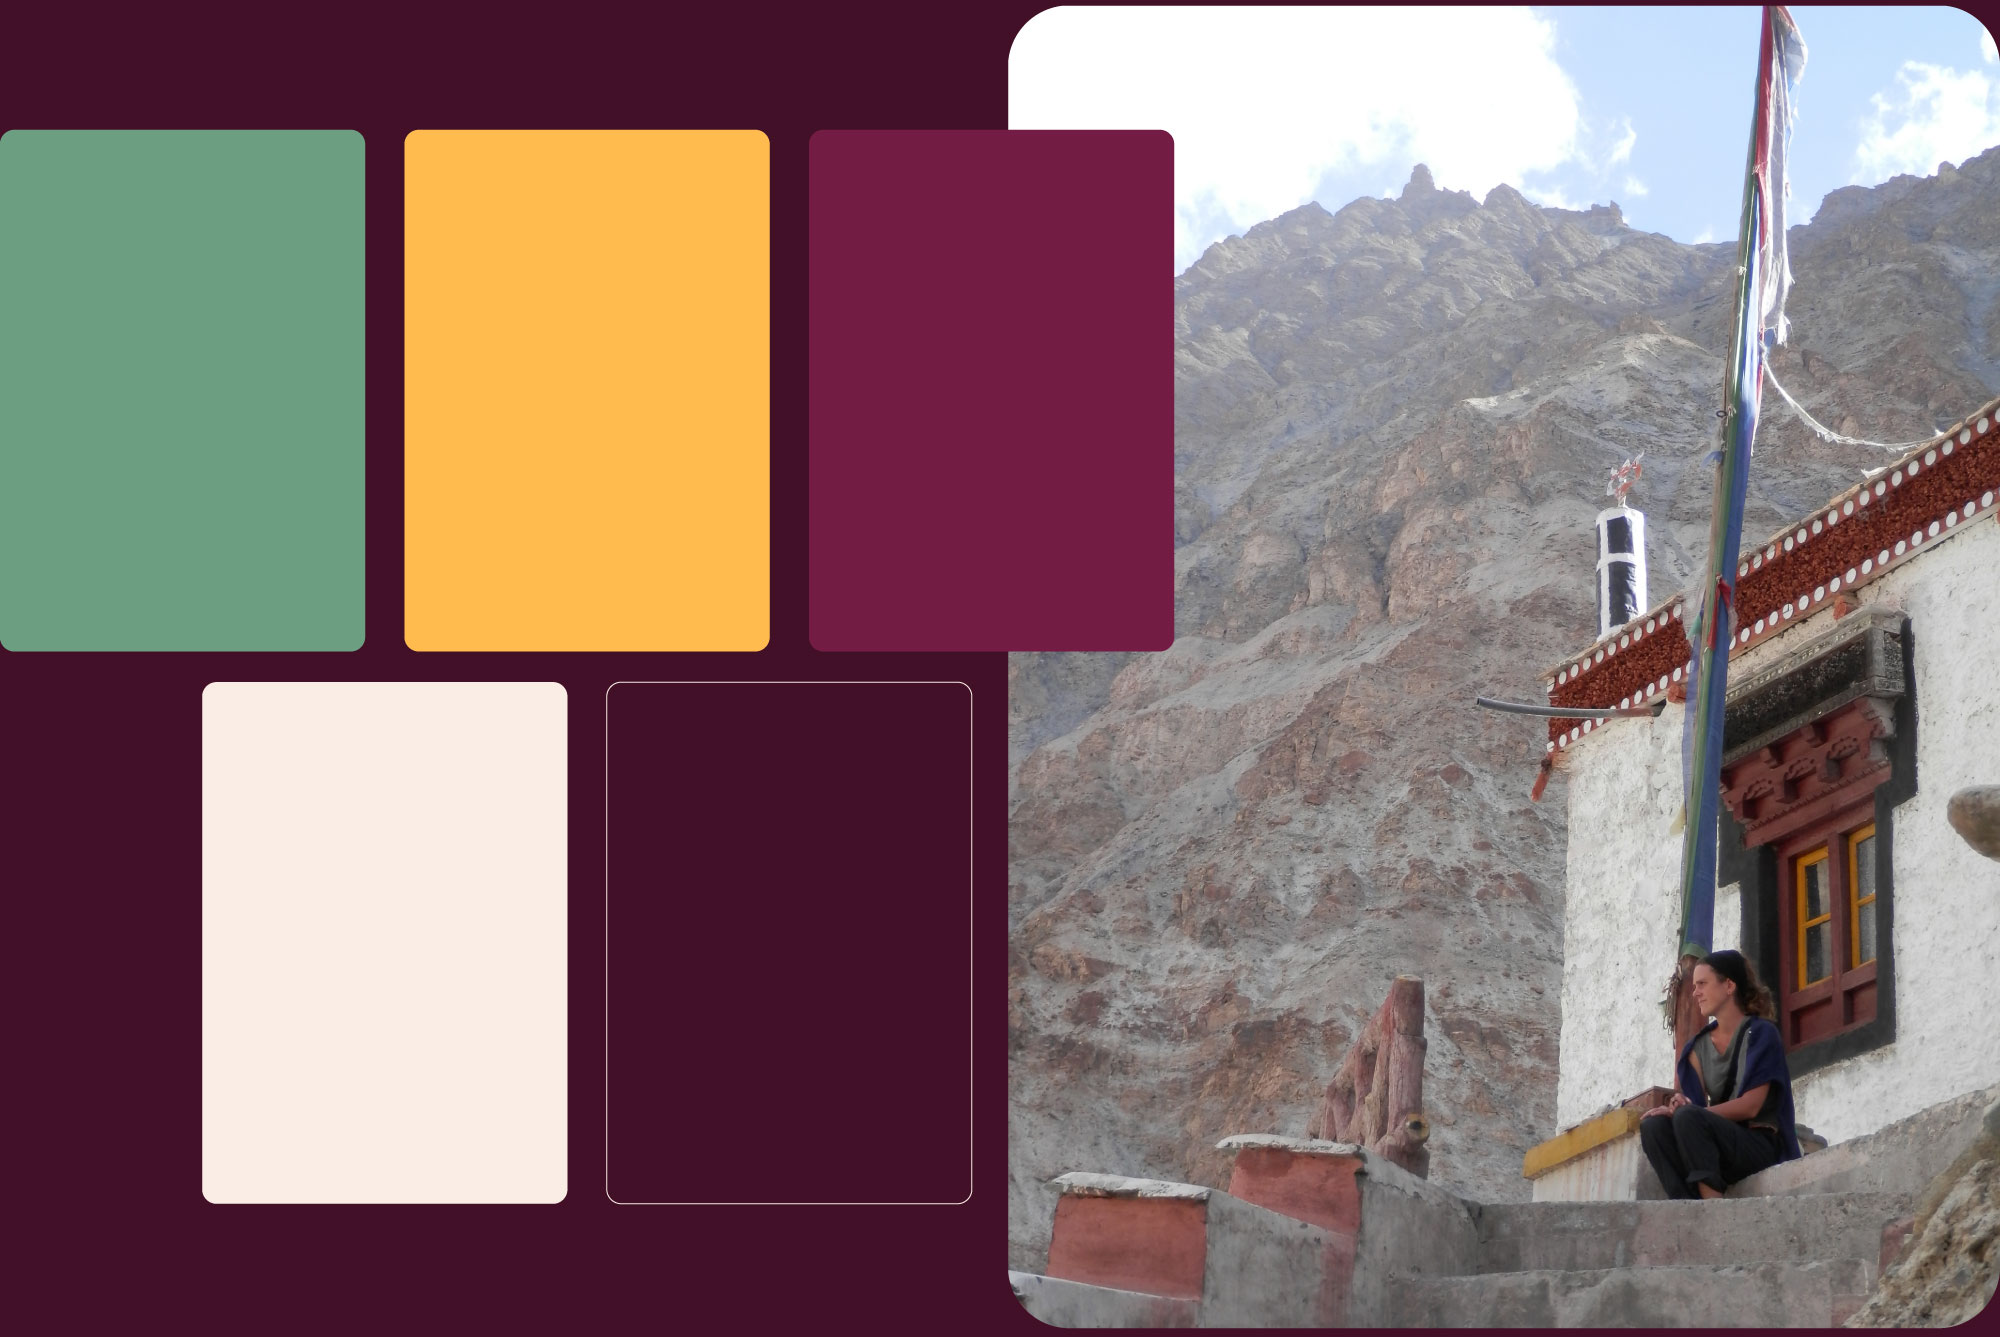 Can Julley, Brand Colors. Inspired from Laddack landscapes